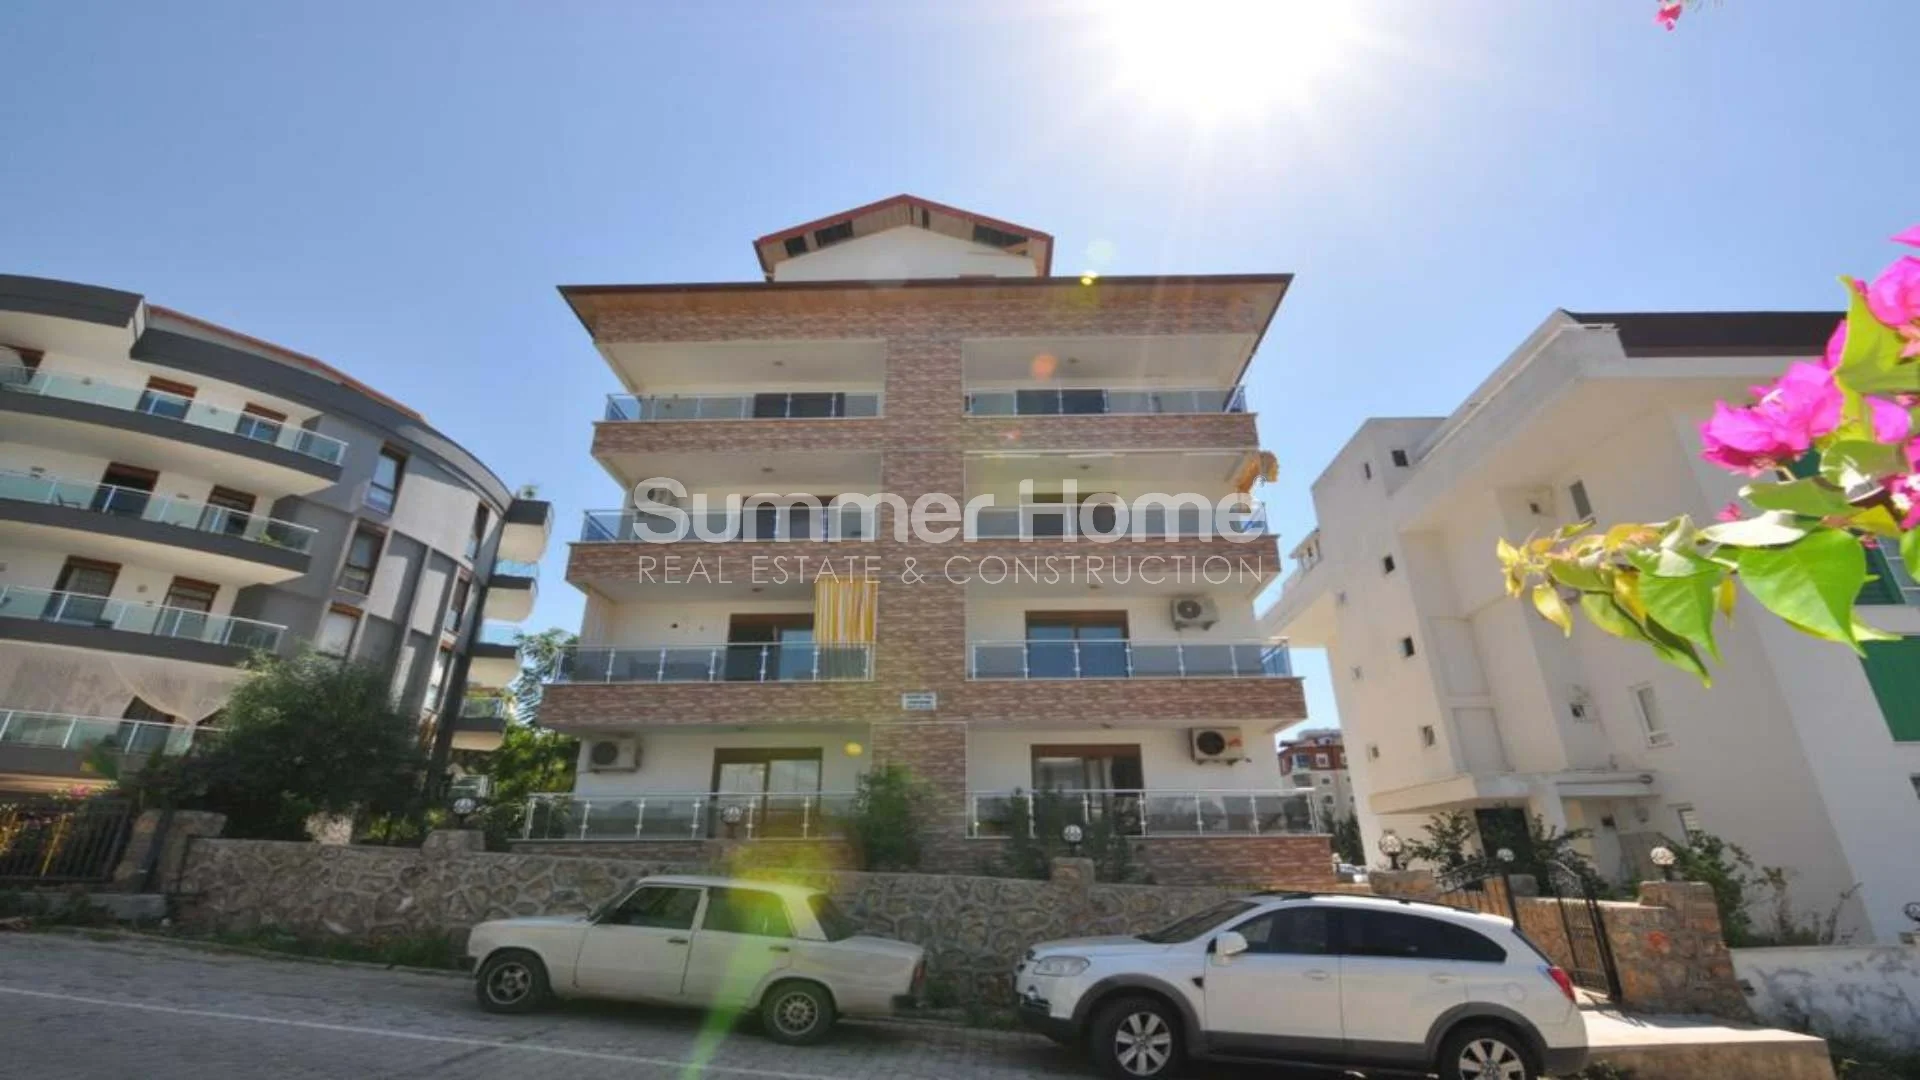 For sale Apartment Alanya Tosmur general - 2